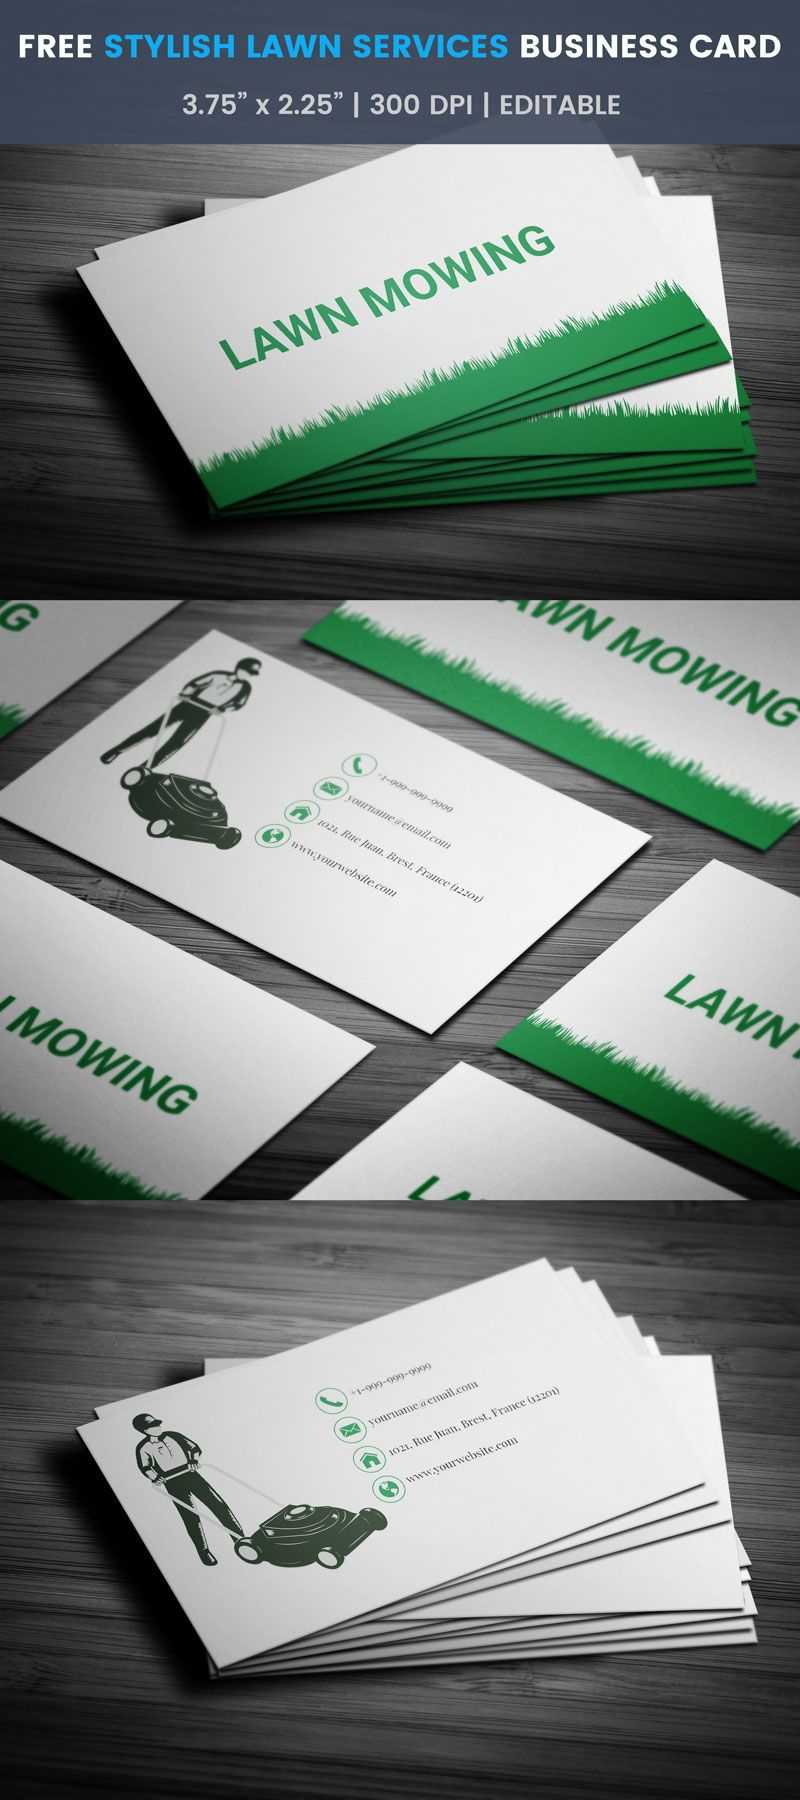 Brilliant Lawn Mowing Business Card  Full Preview | Free Pertaining To Lawn Care Business Cards Templates Free